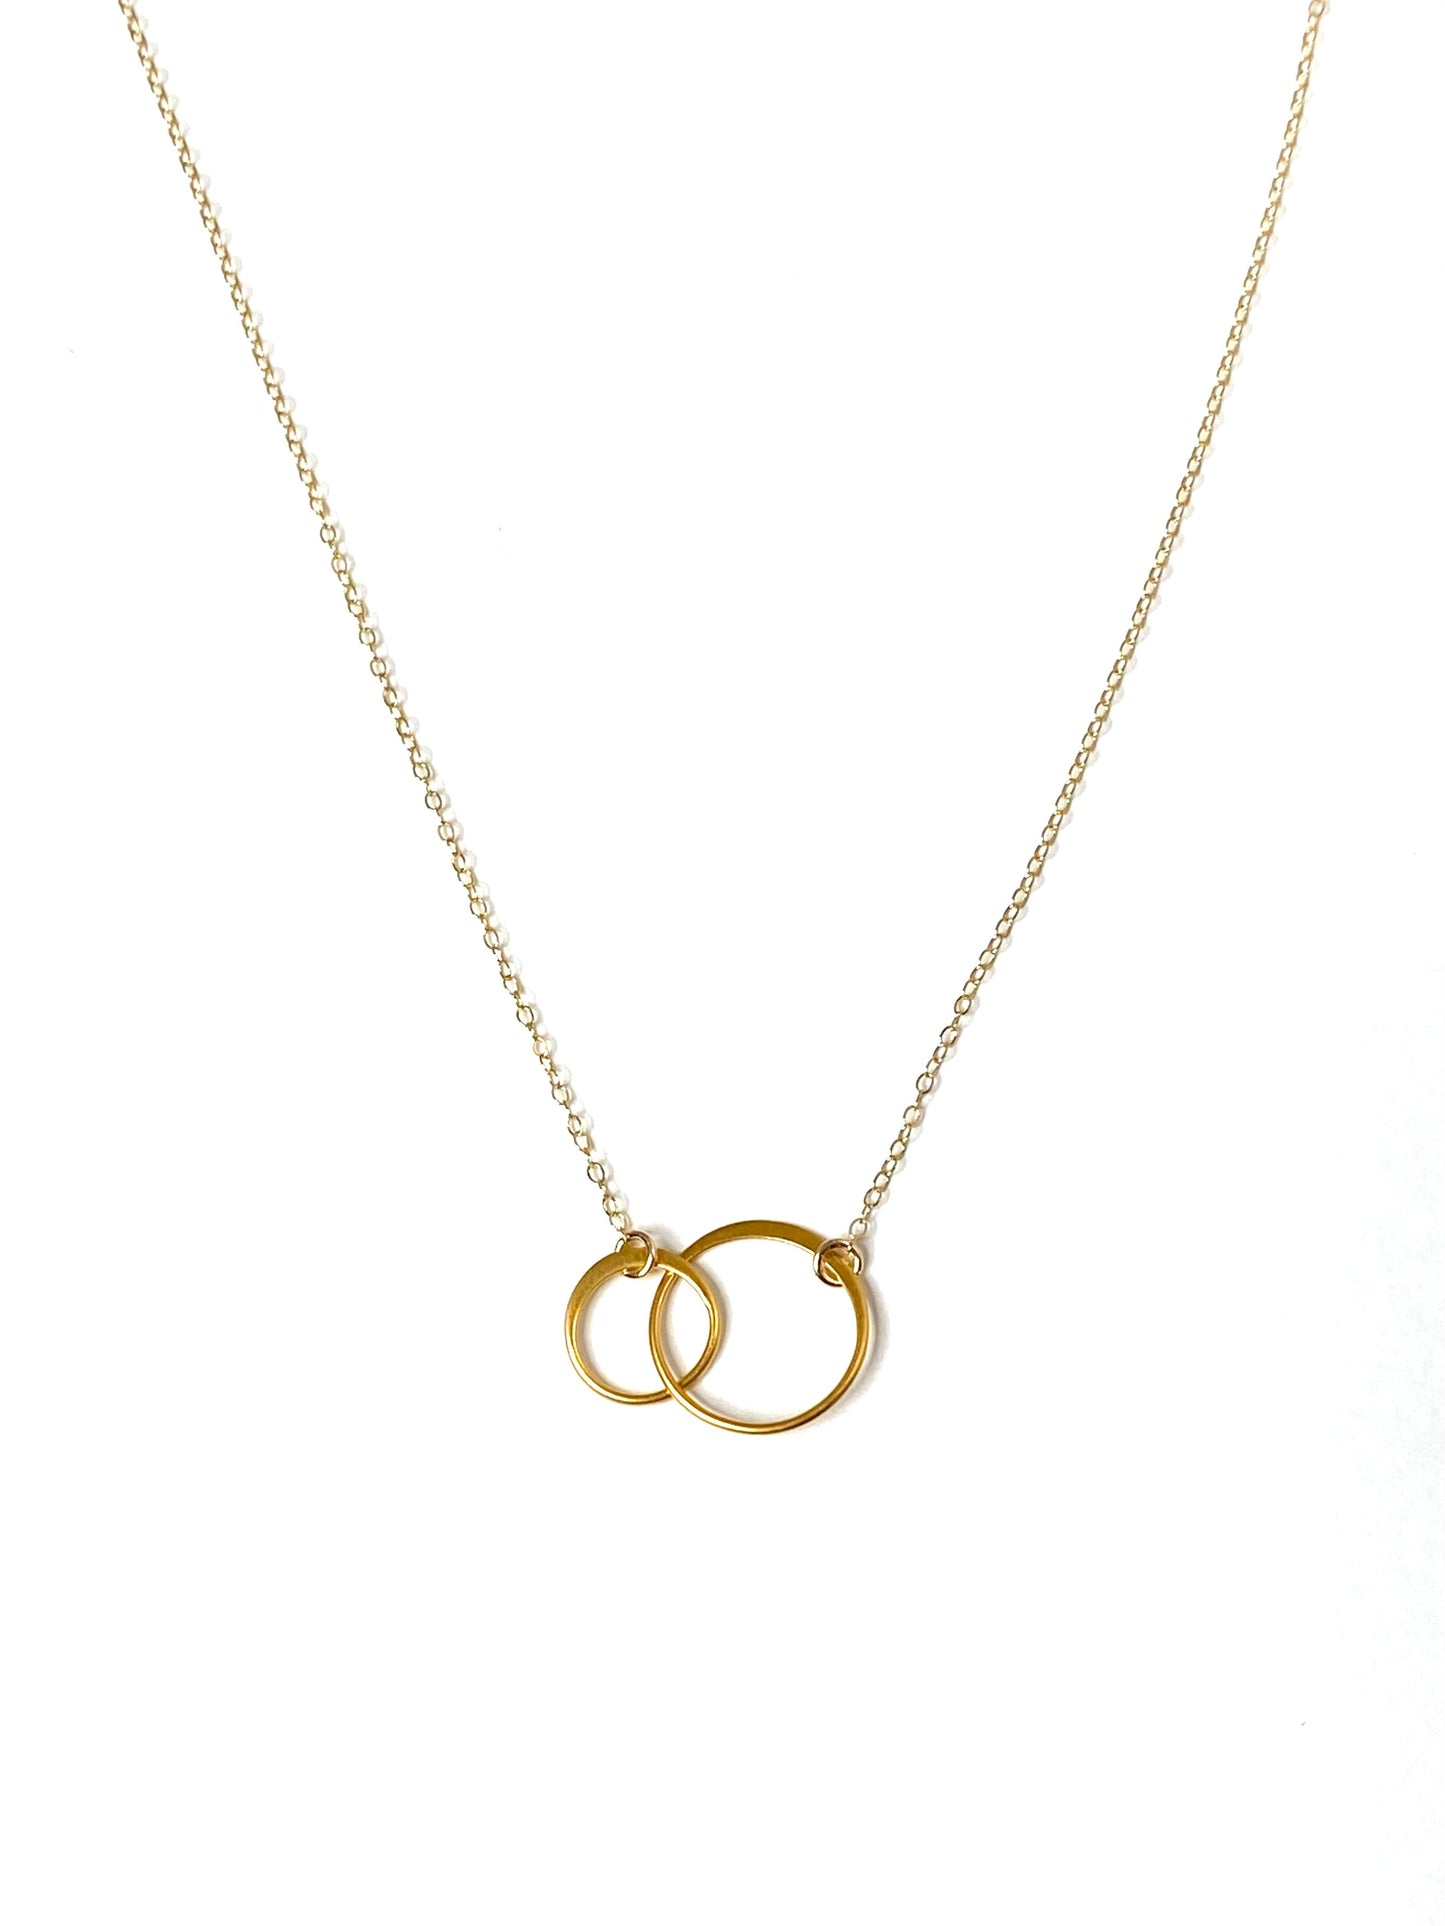 Two Intertwined Circle Necklace in Gold